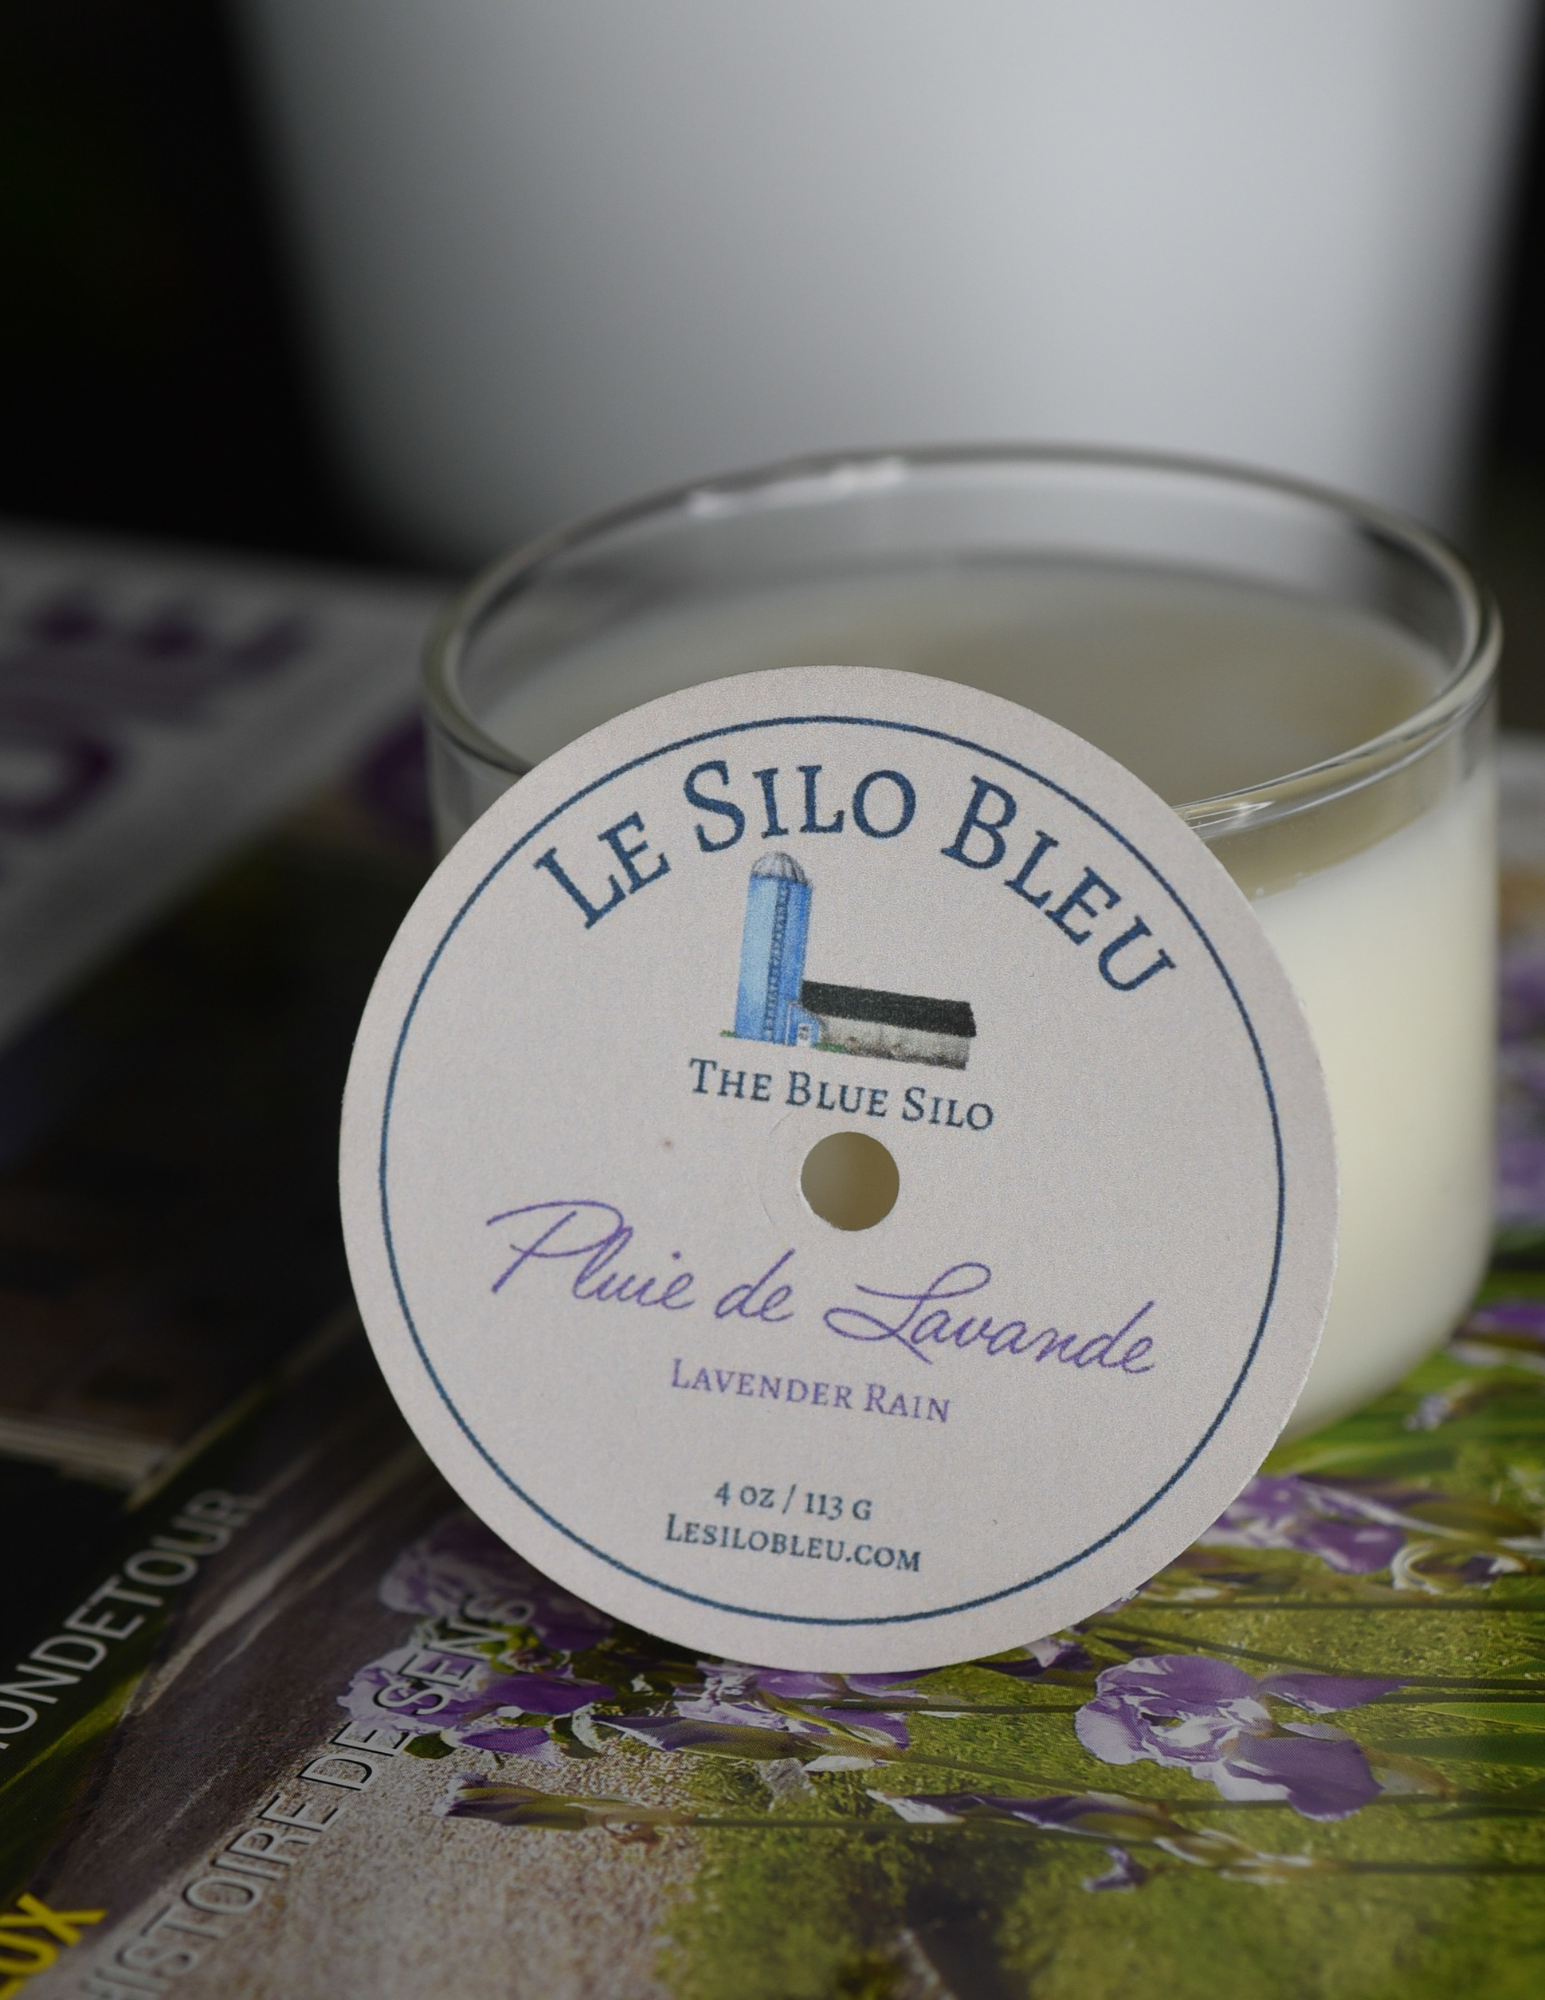 A lavender and rain scented candle is sitting on top of a French magazine with a plant in a white pot in the background.